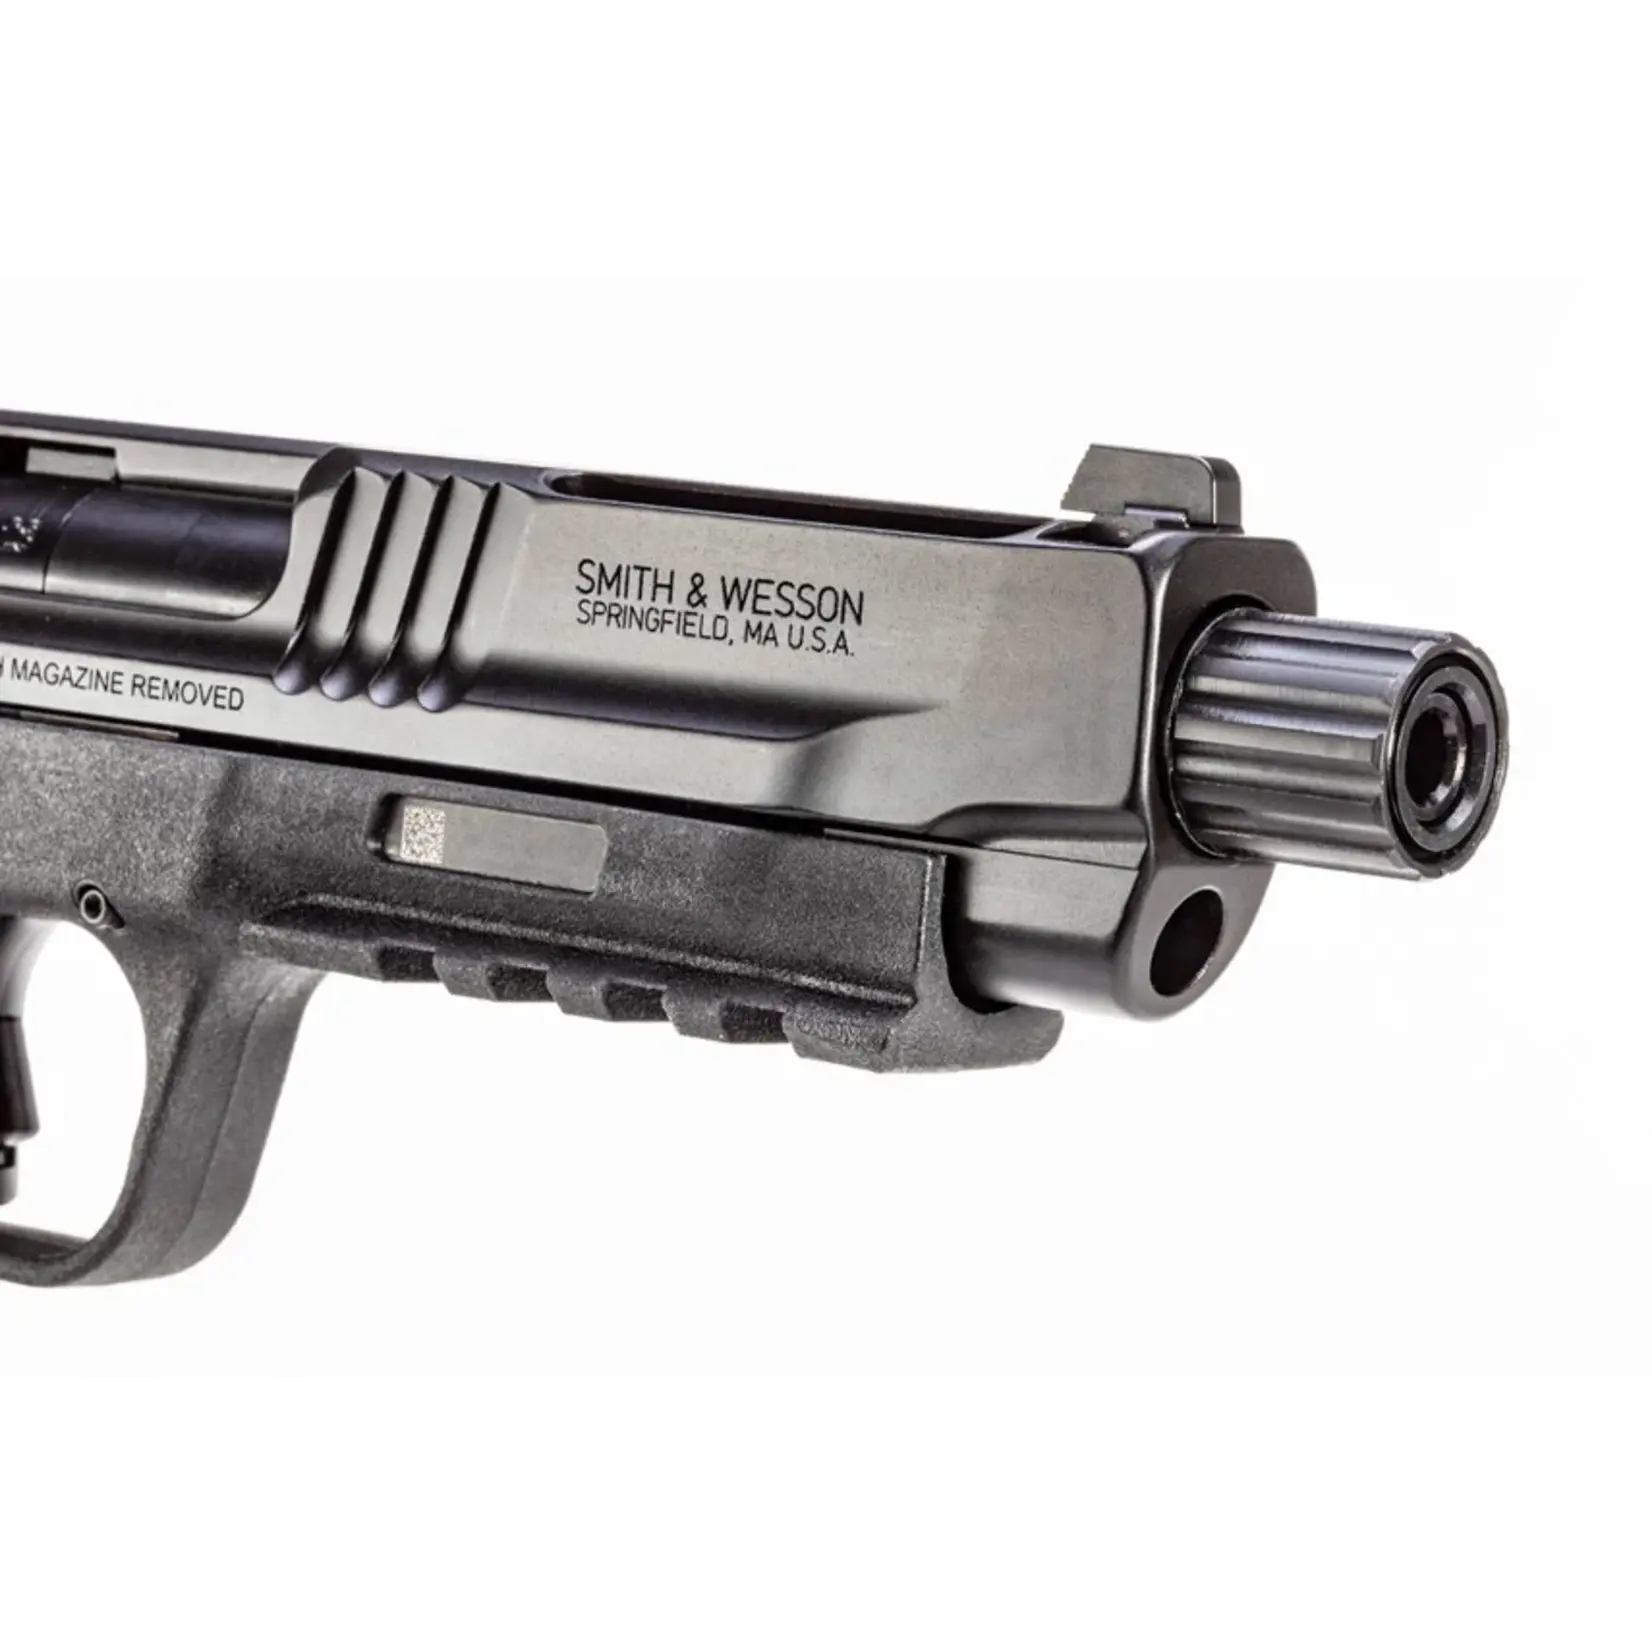 Smith and Wesson Smith & Wesson M&P 5.7 - 5.7x28mm - 22rnd